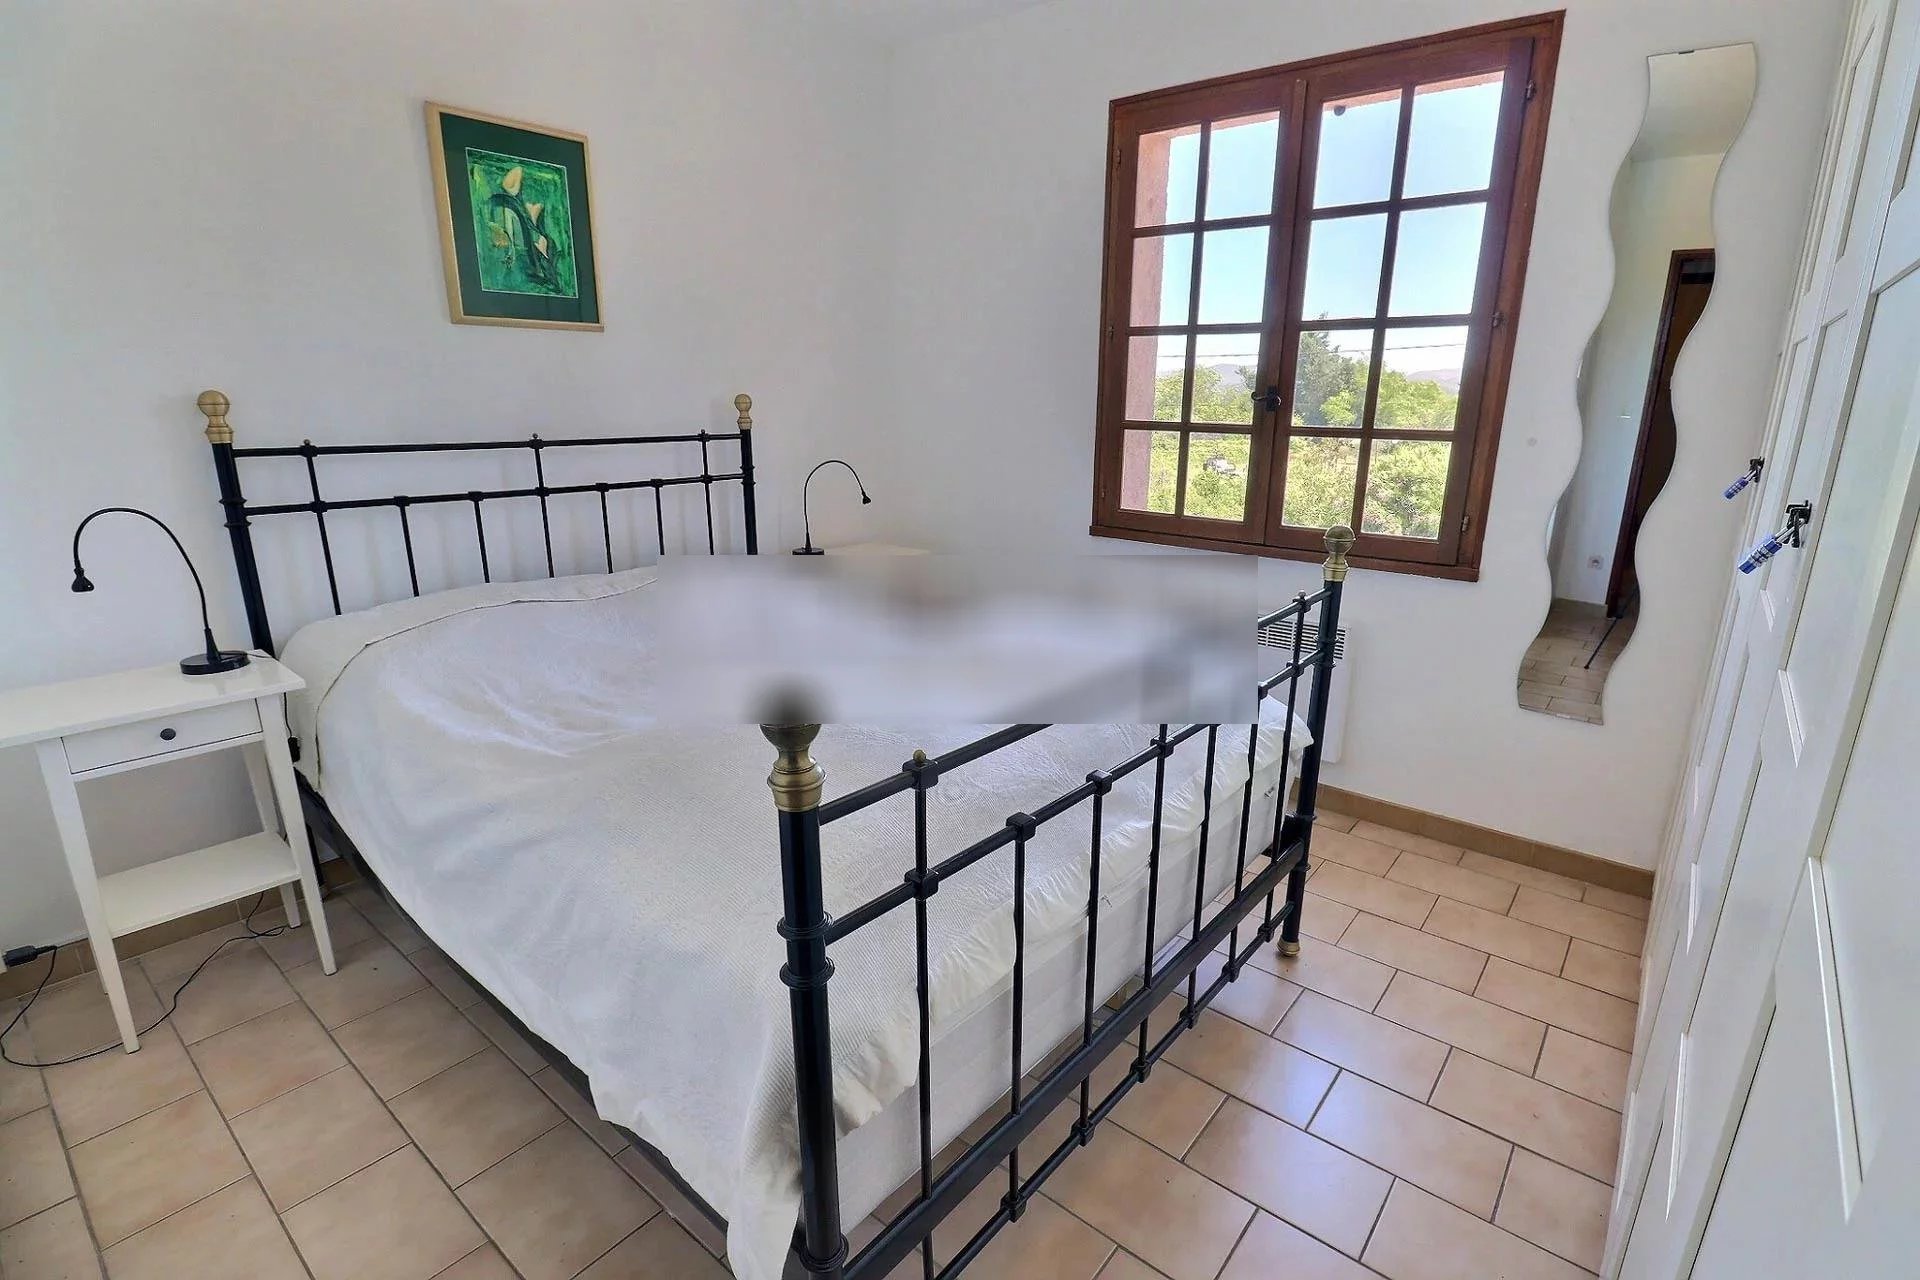 Provencal villa in a quiet residential area with a lovely view